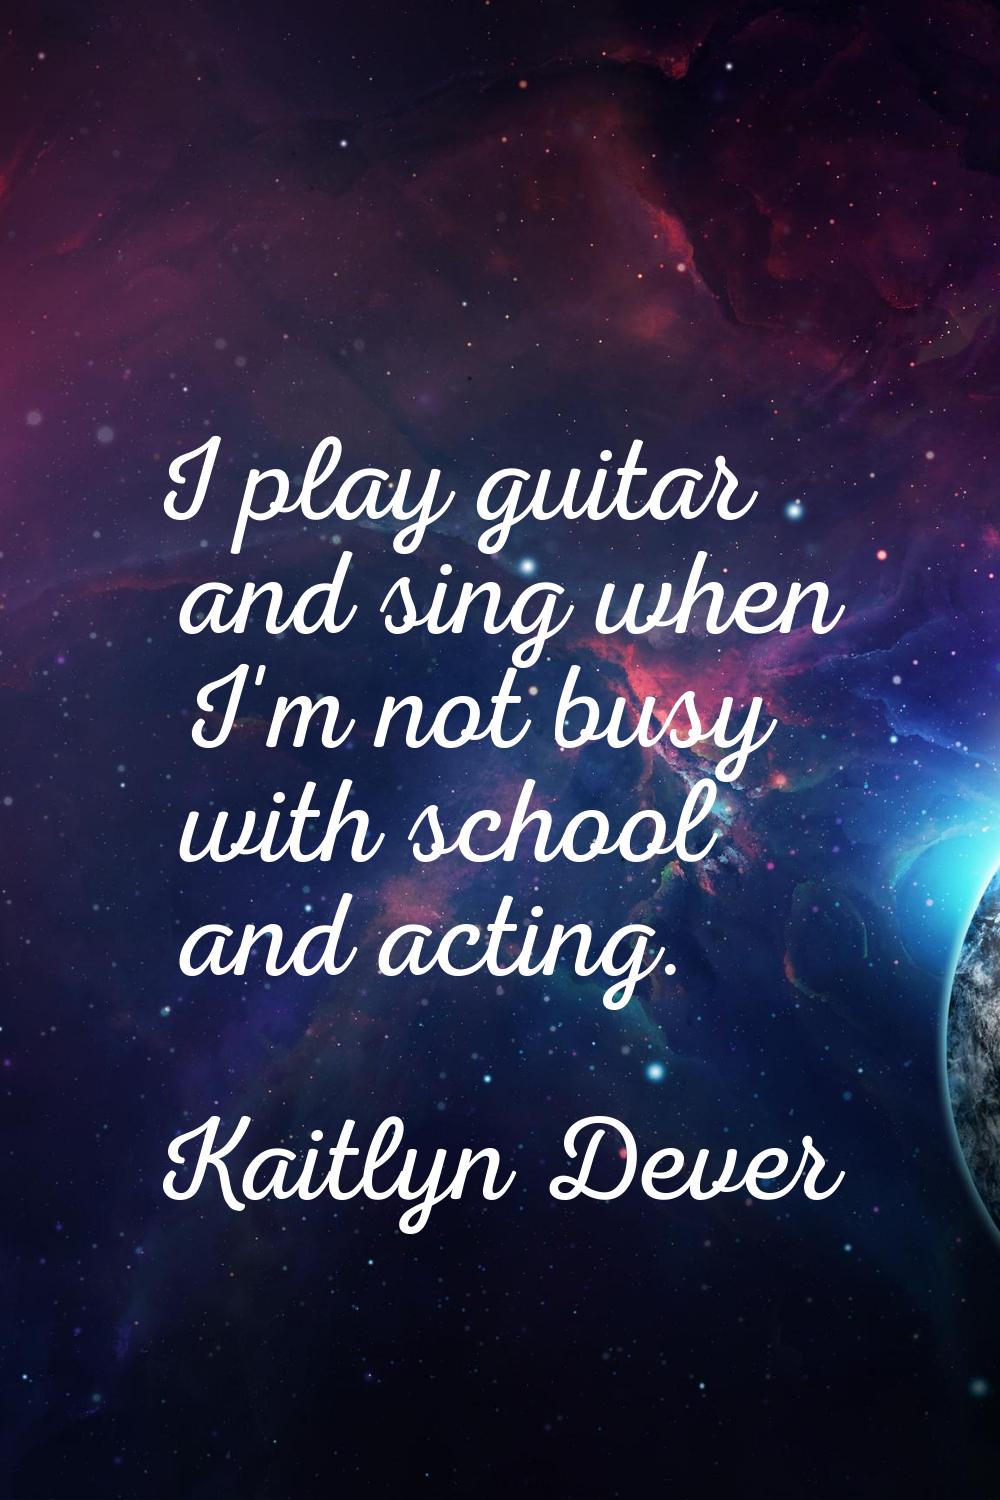 I play guitar and sing when I'm not busy with school and acting.